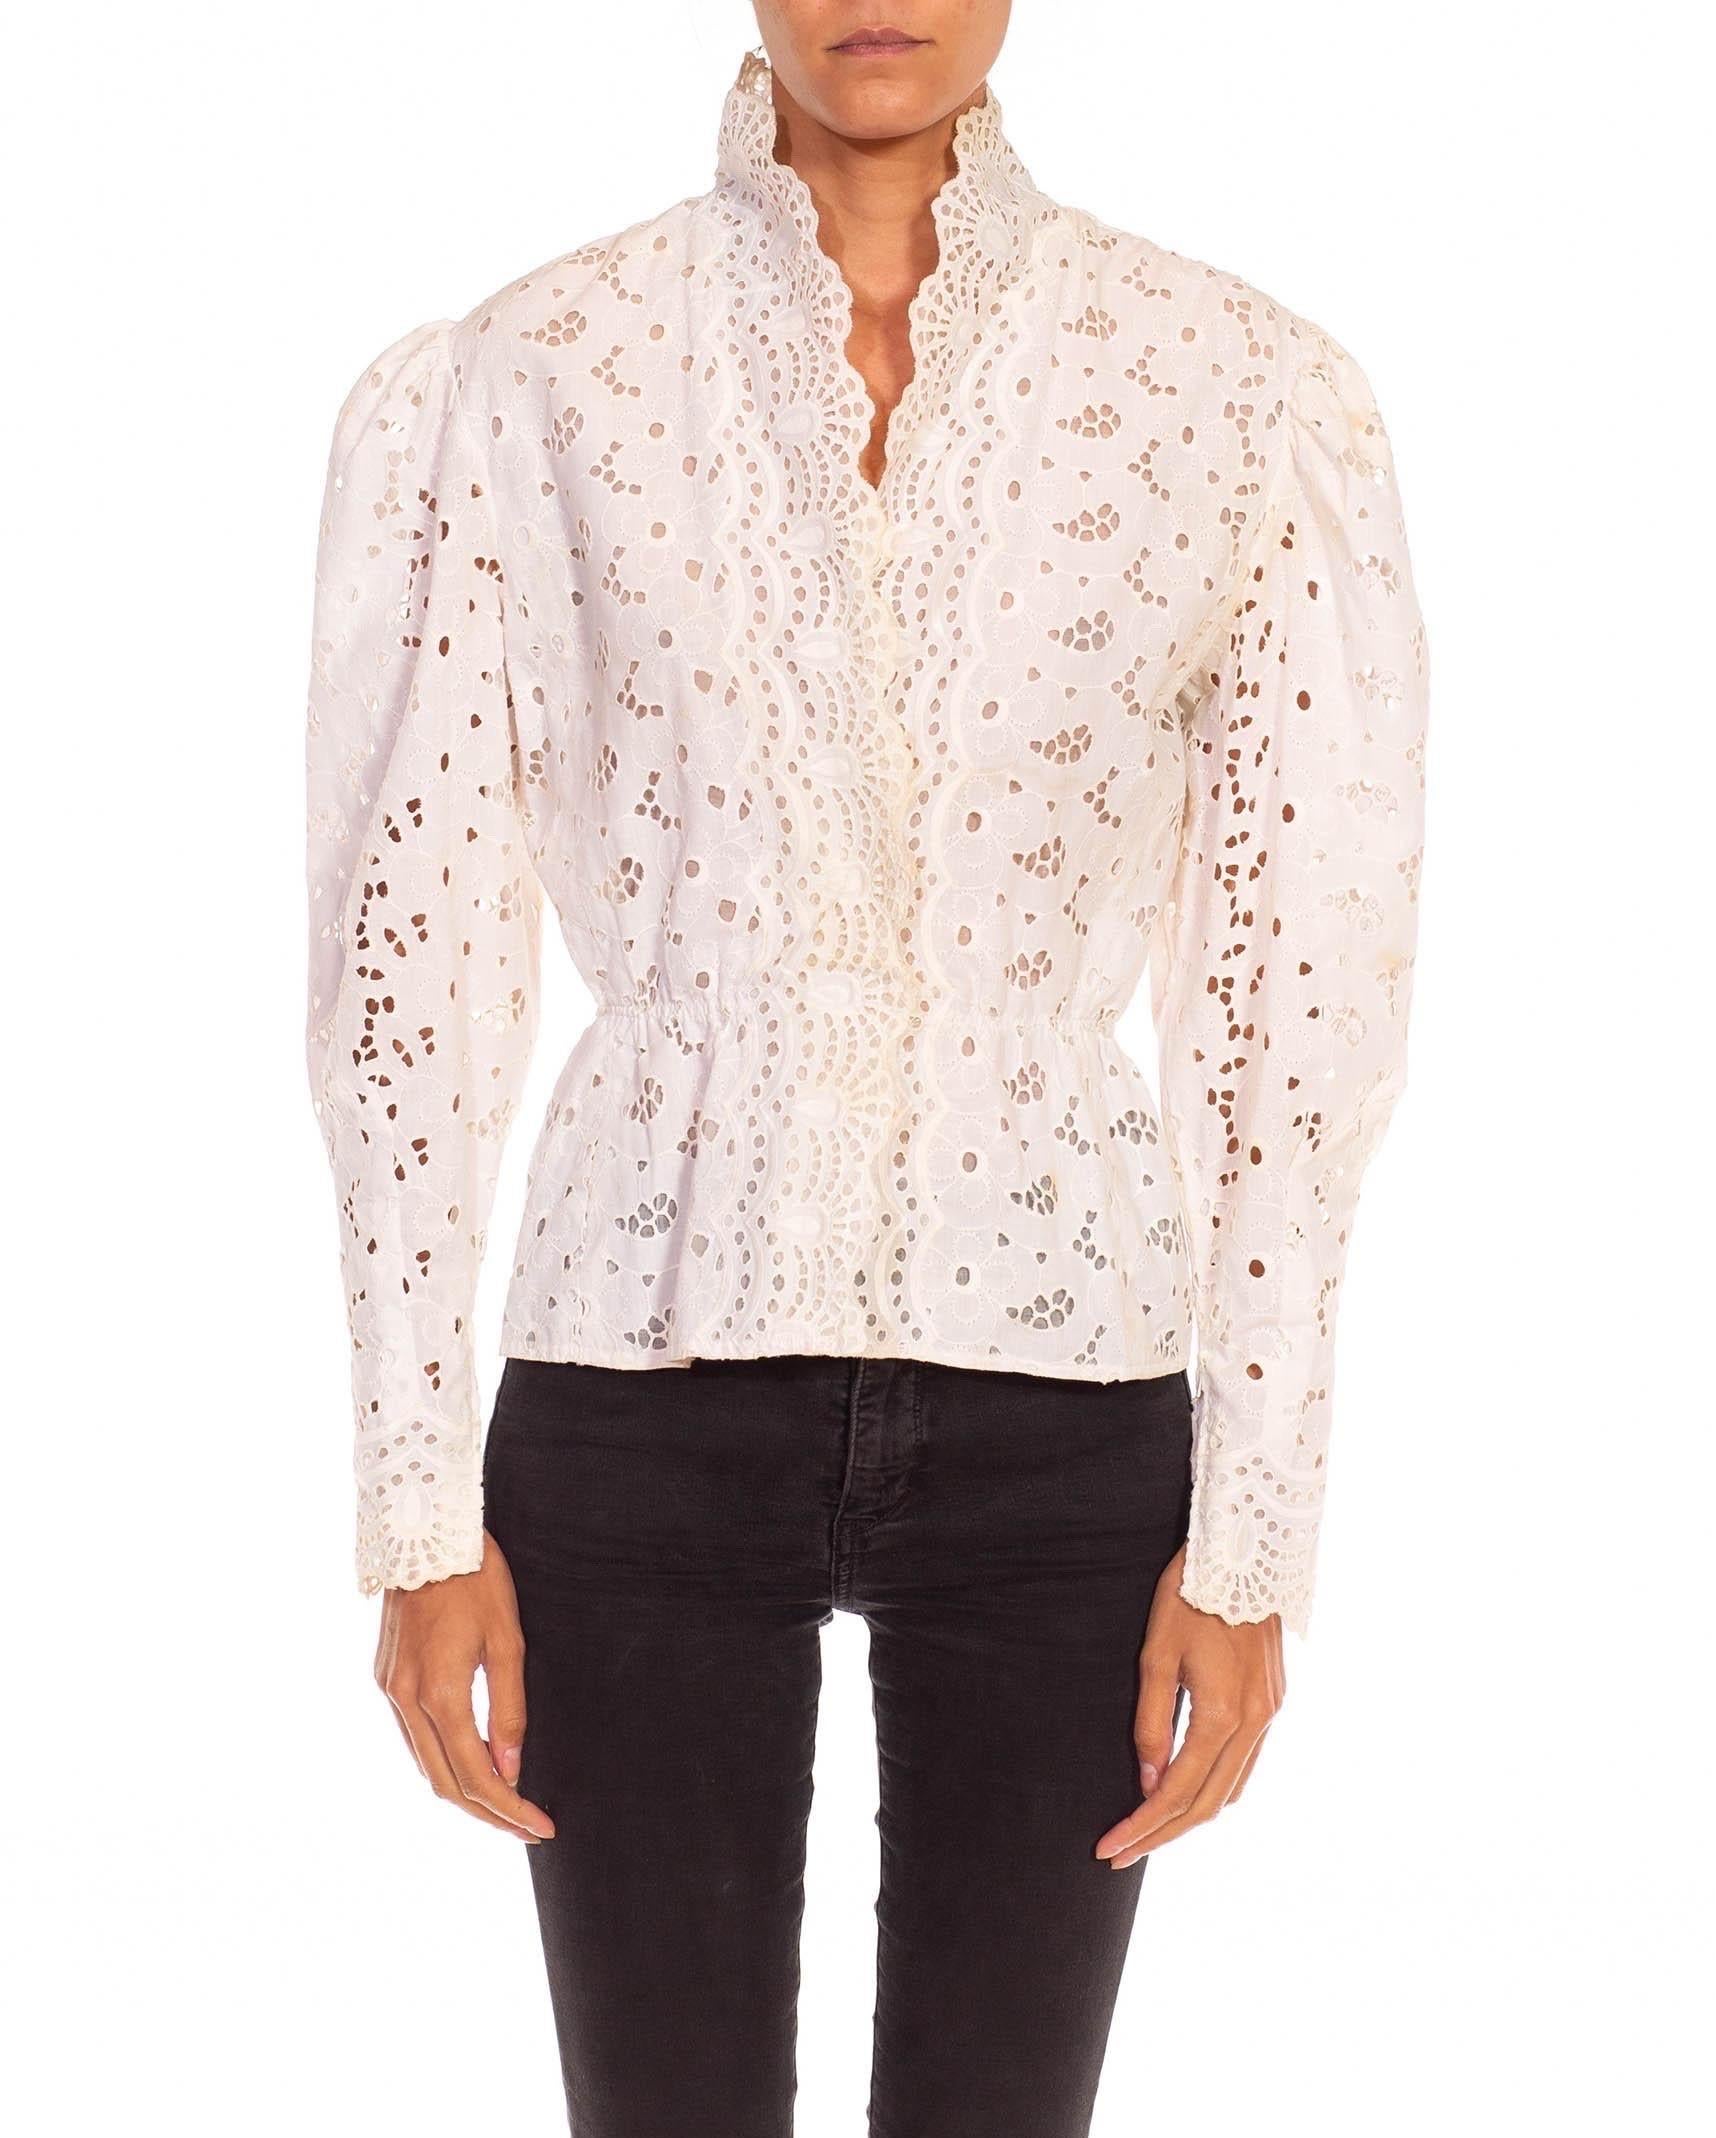 1960S Pauline Trigere Cream Cotton Eyelet Lace Top In Excellent Condition For Sale In New York, NY